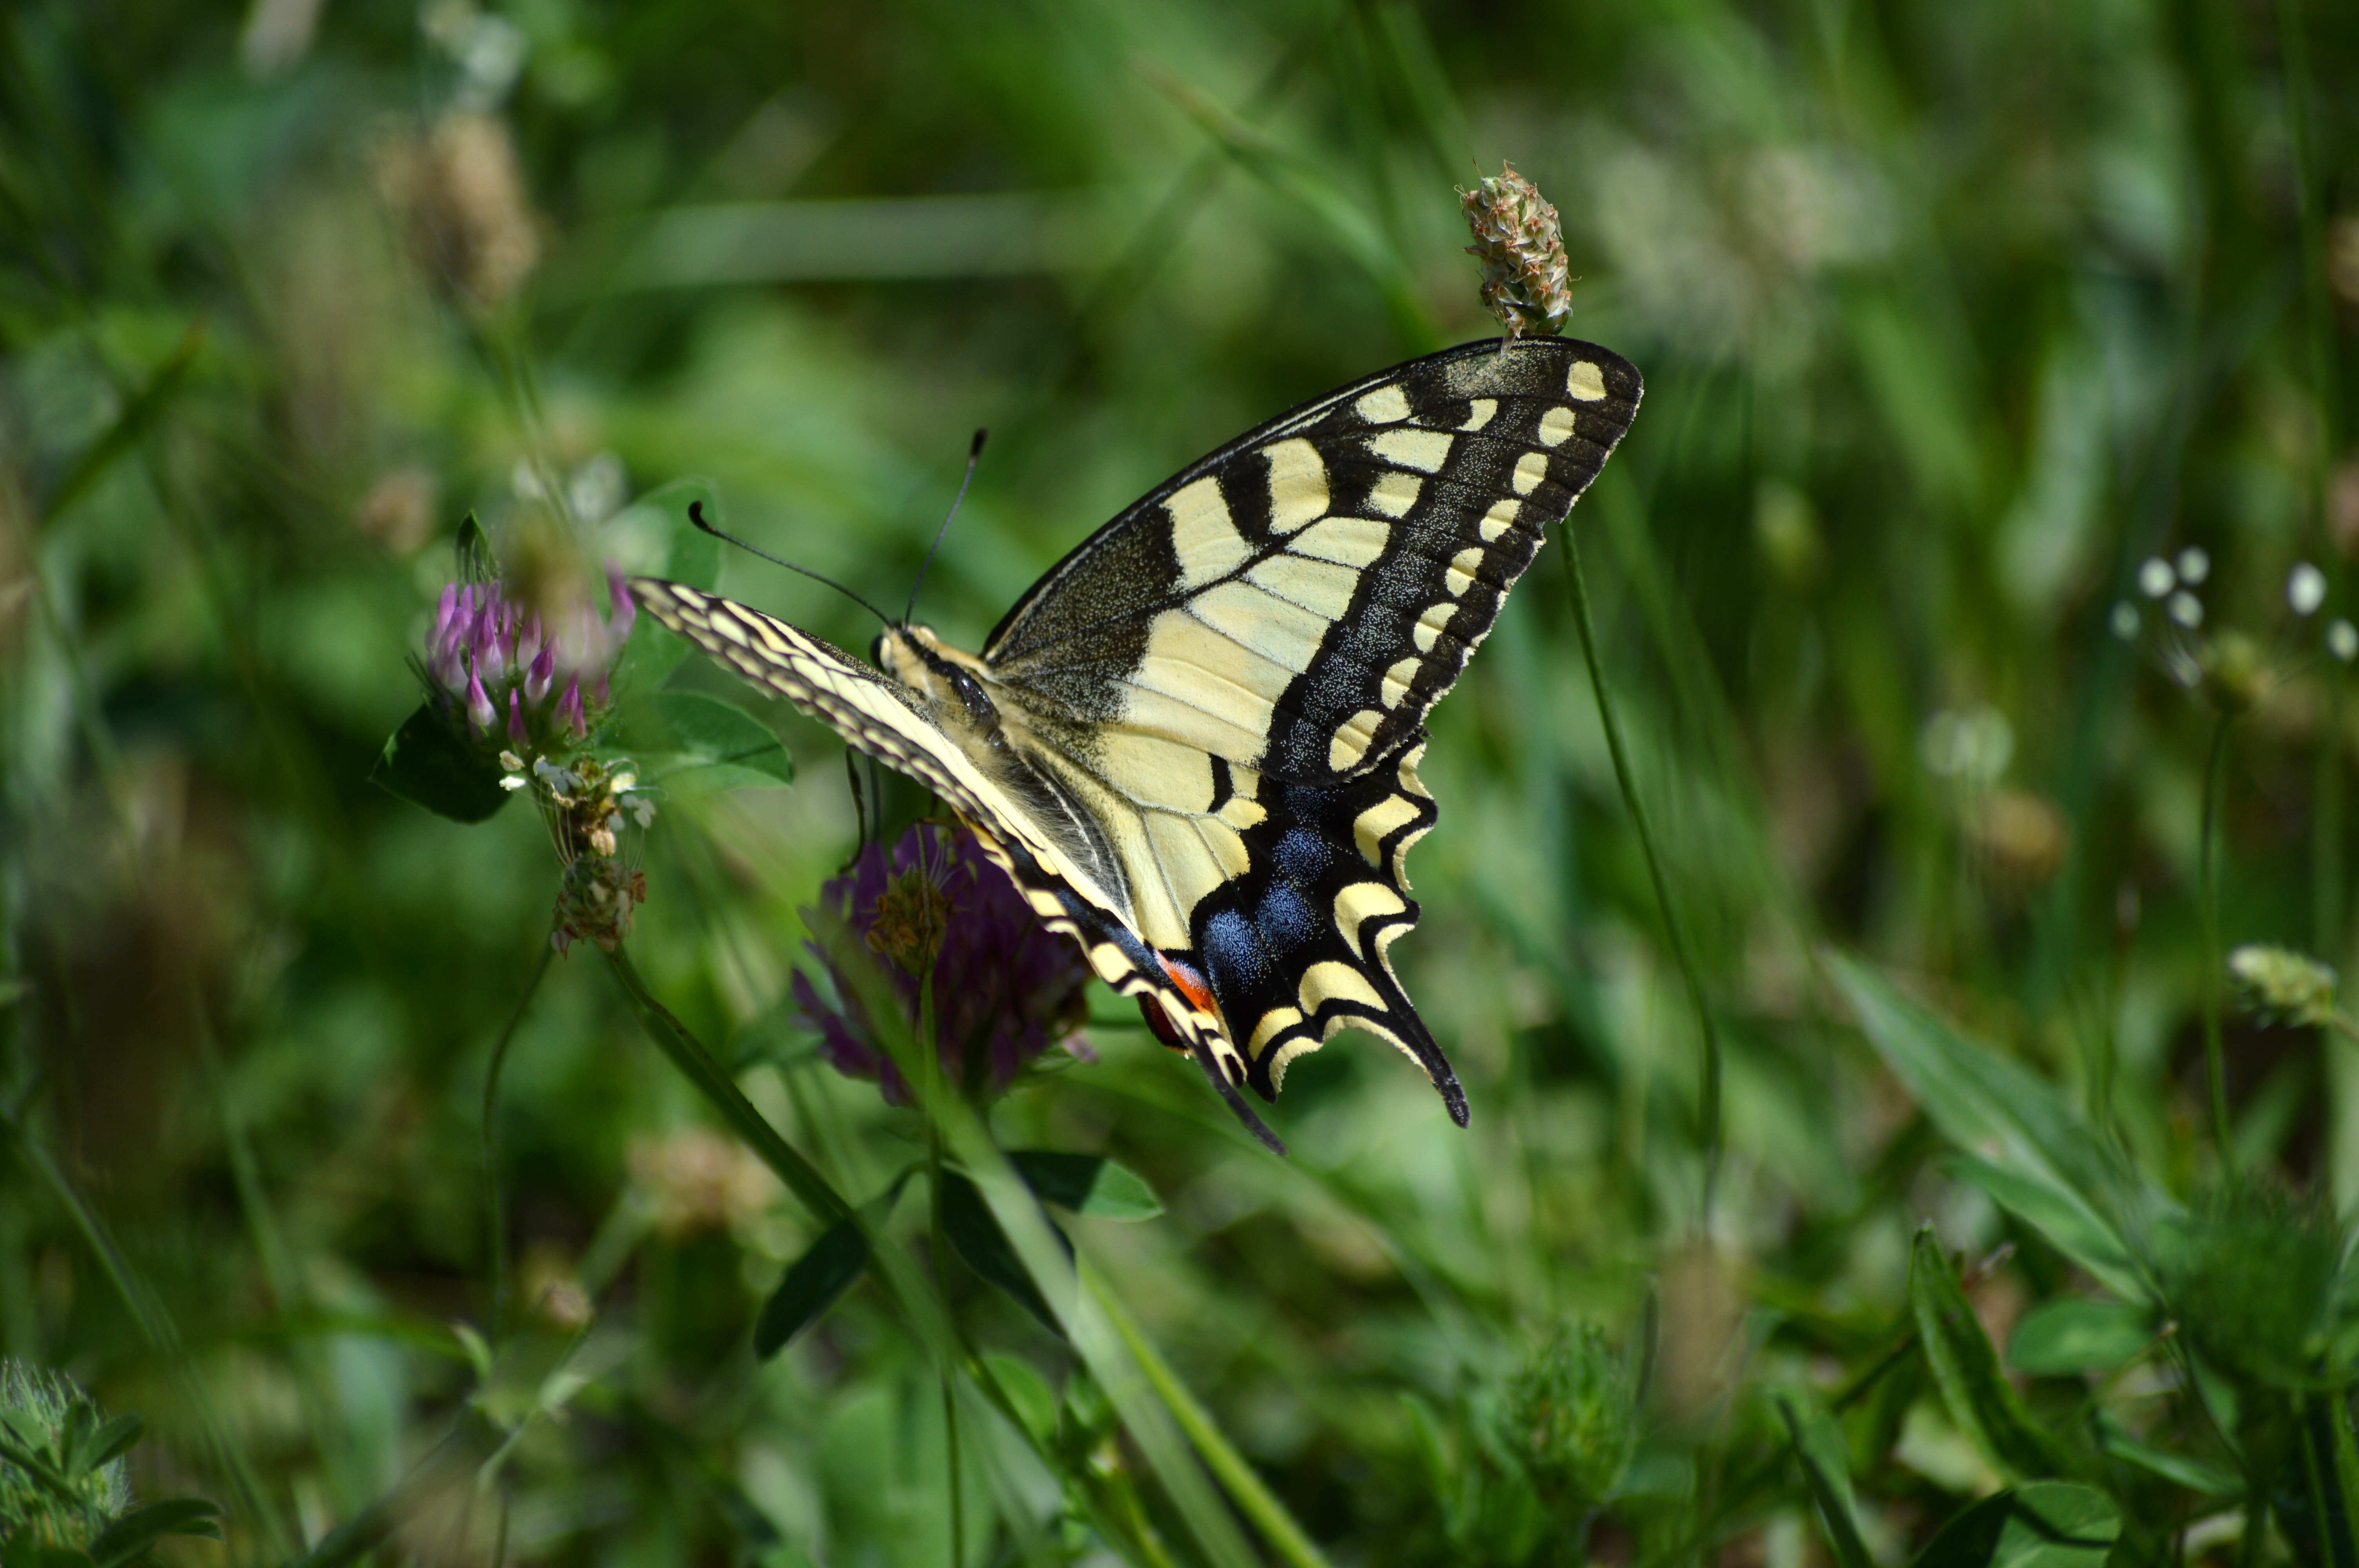 Butterfly, Europe, Bulgaria, animals in the wild, one animal